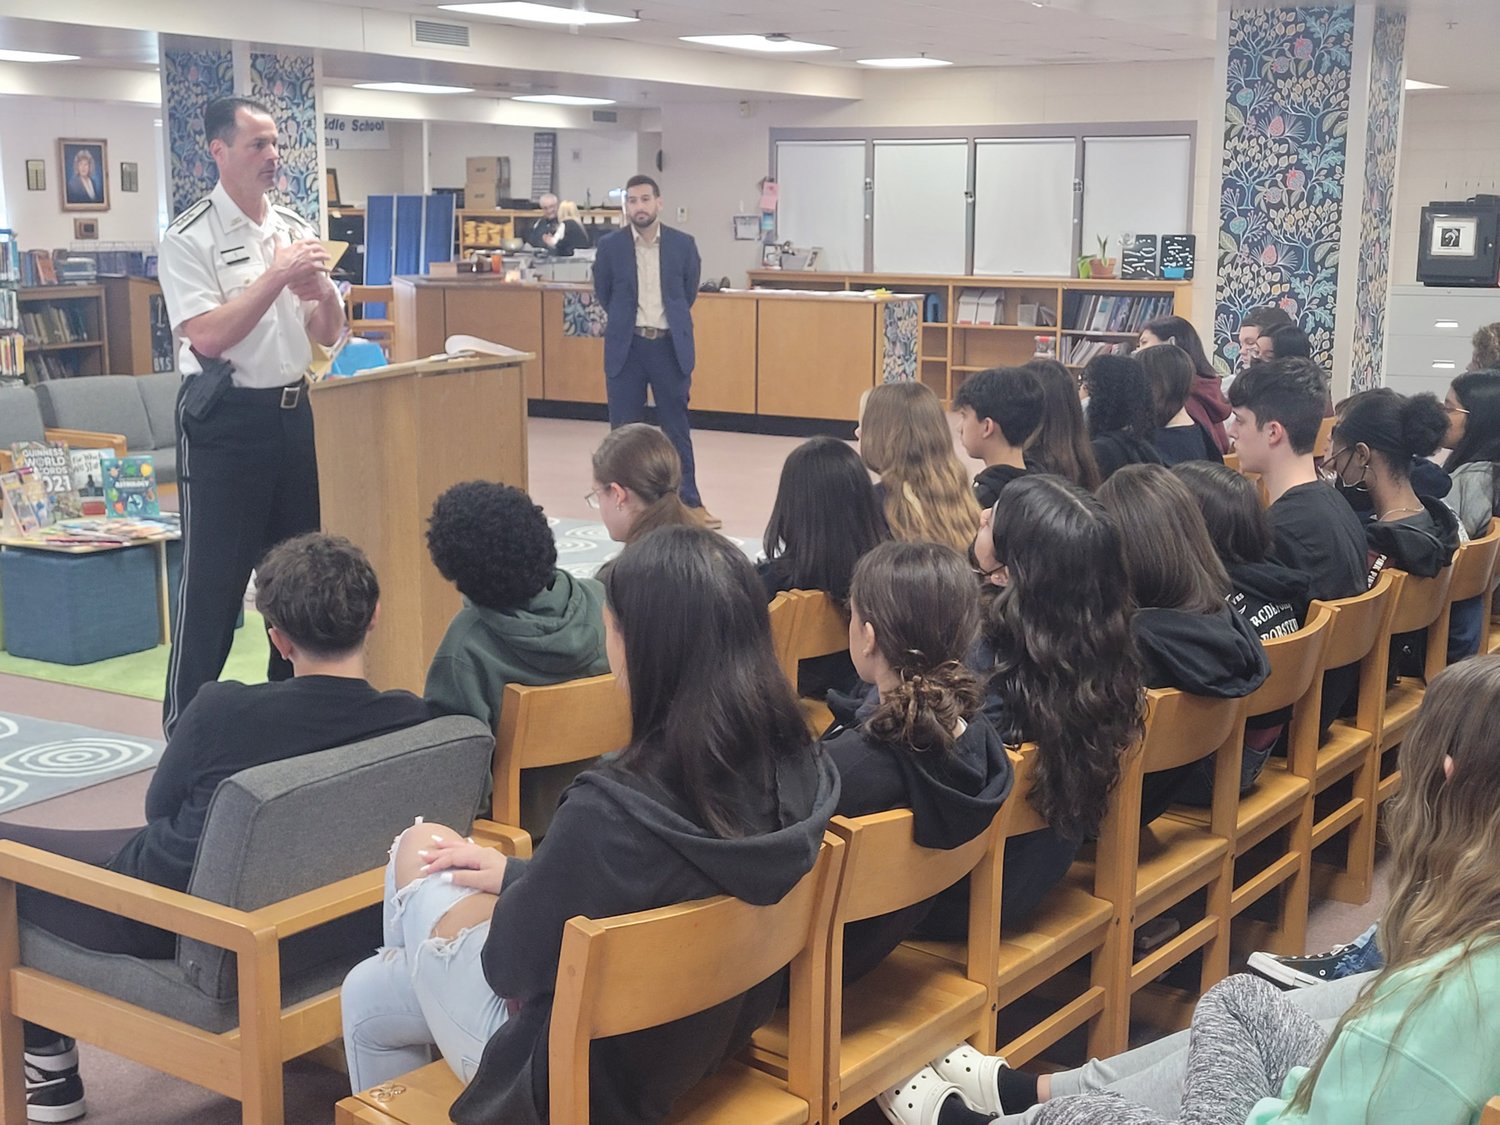 TOUGH QUESTIONS: Johnston Police Chief Joseph P. Razza fielded tough questions from Ferri Middle School civics students during Law Day.